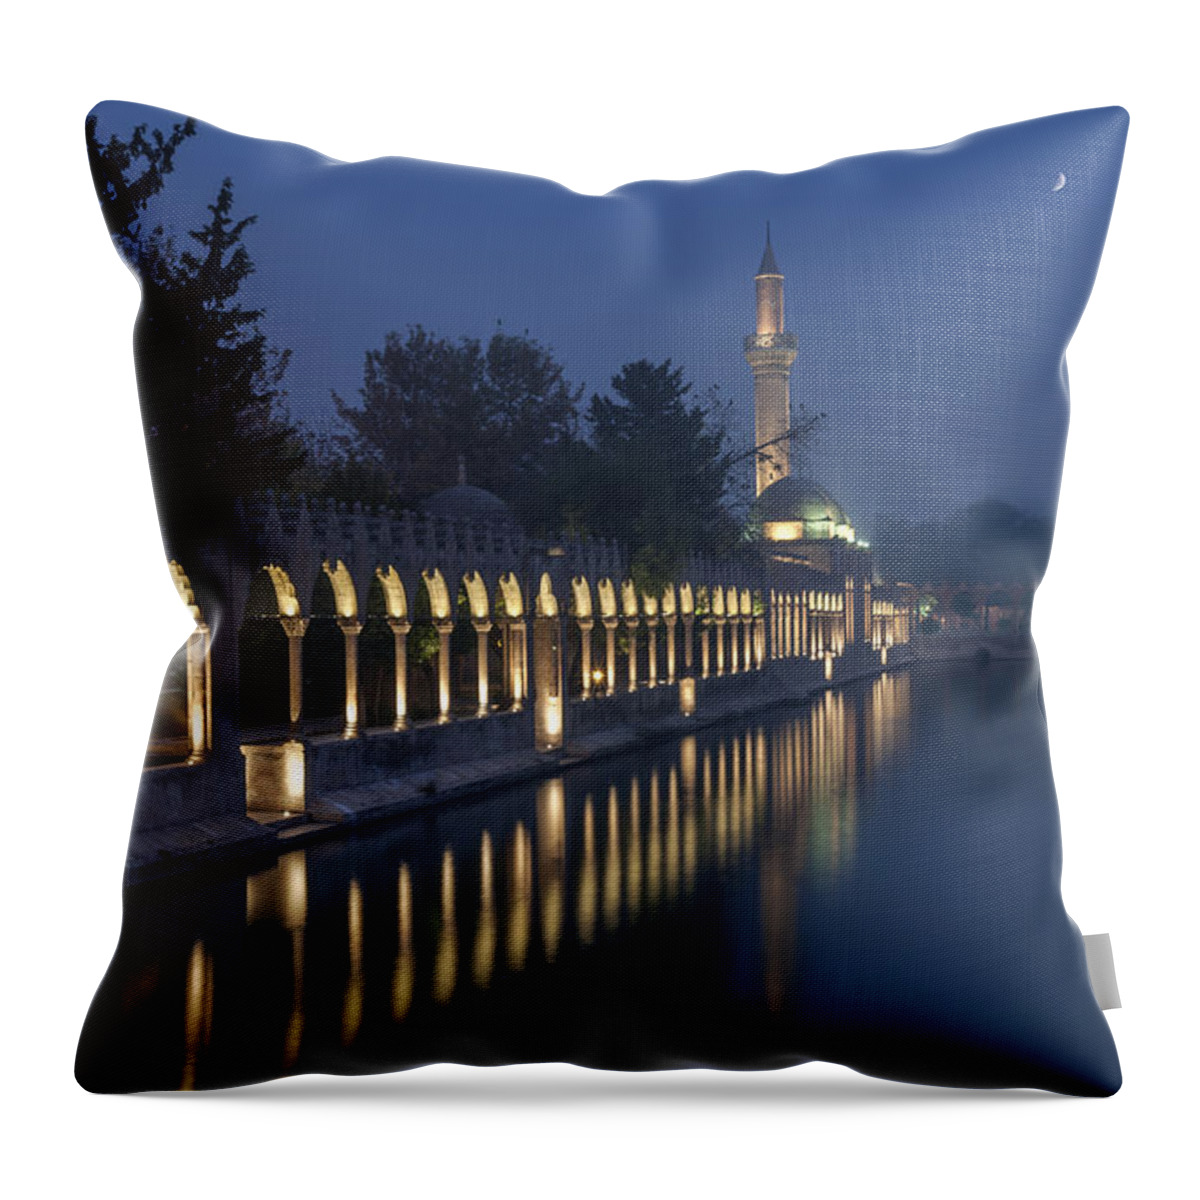 People Throw Pillow featuring the photograph Rizvaniye Mosque and Halil-u Rahman by Ayhan Altun